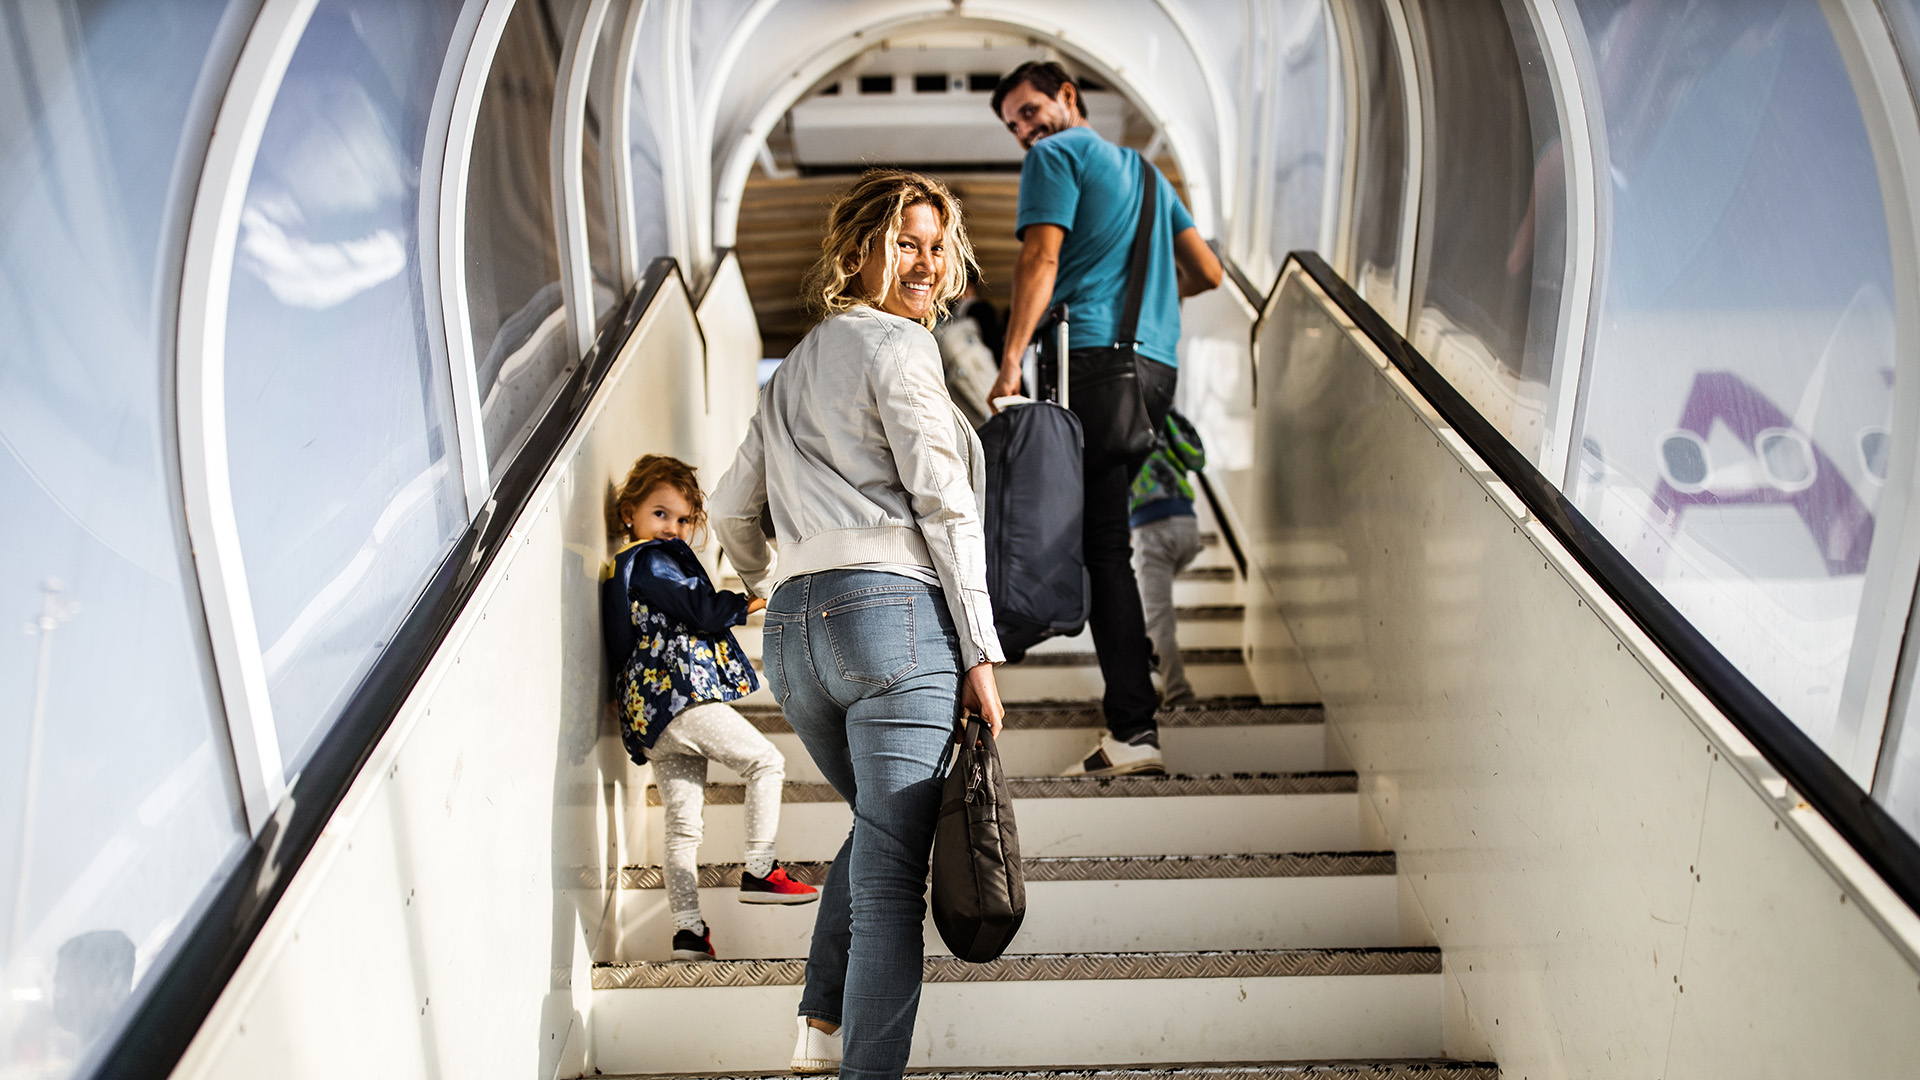 Two adults and a child looks back and smile as they ascend aircraft stairs up to a plane